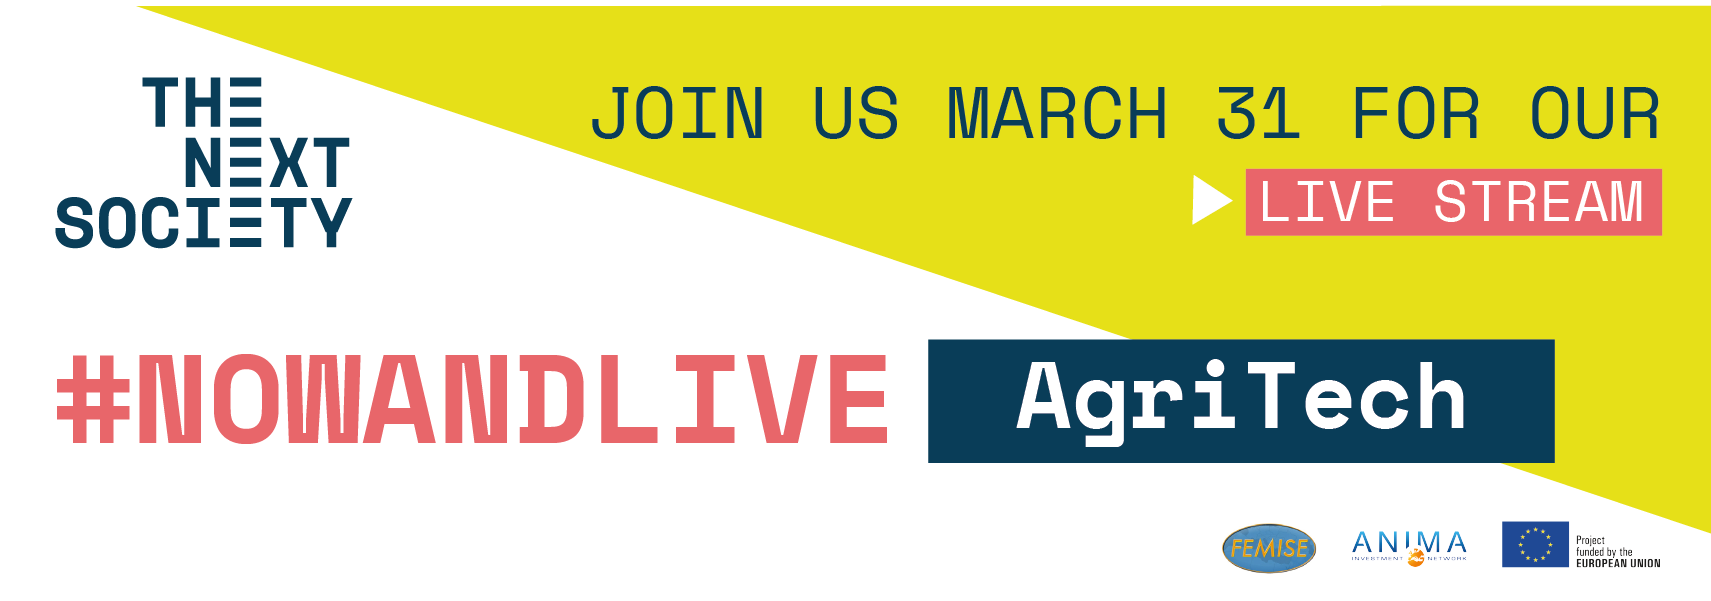 webinar Now and Live Agritech